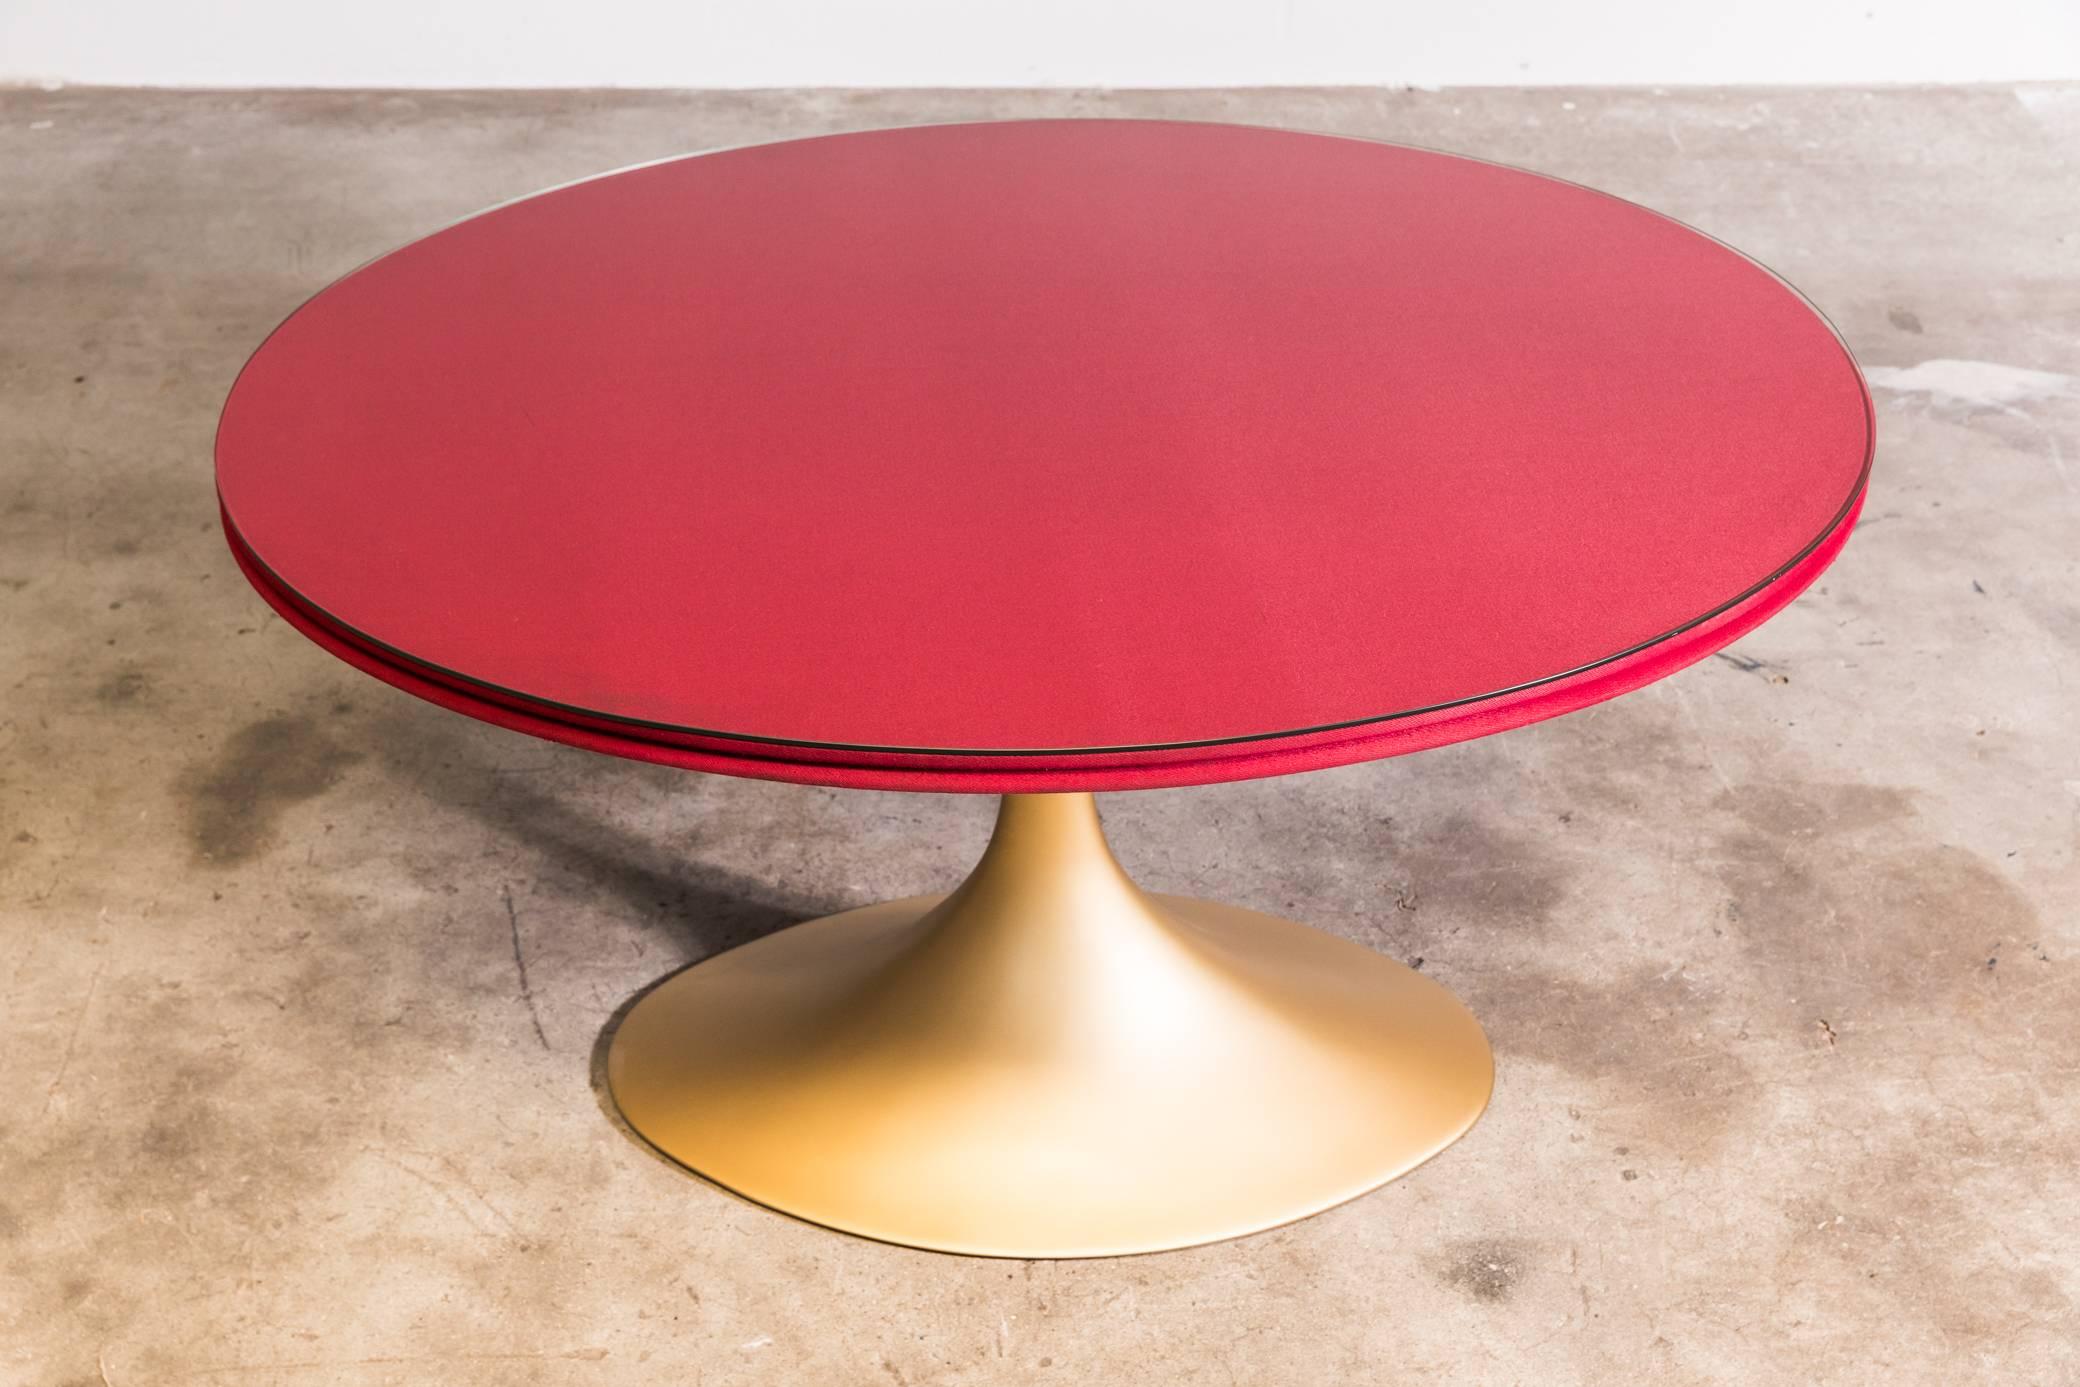 Stunning one-off piece by P.Gavazzi.
This amazing oval pedestal table is made from cast iron and retains its original silk and glass tabletop. The base has been fully restored and is in near perfect condition. The chairs are also available for